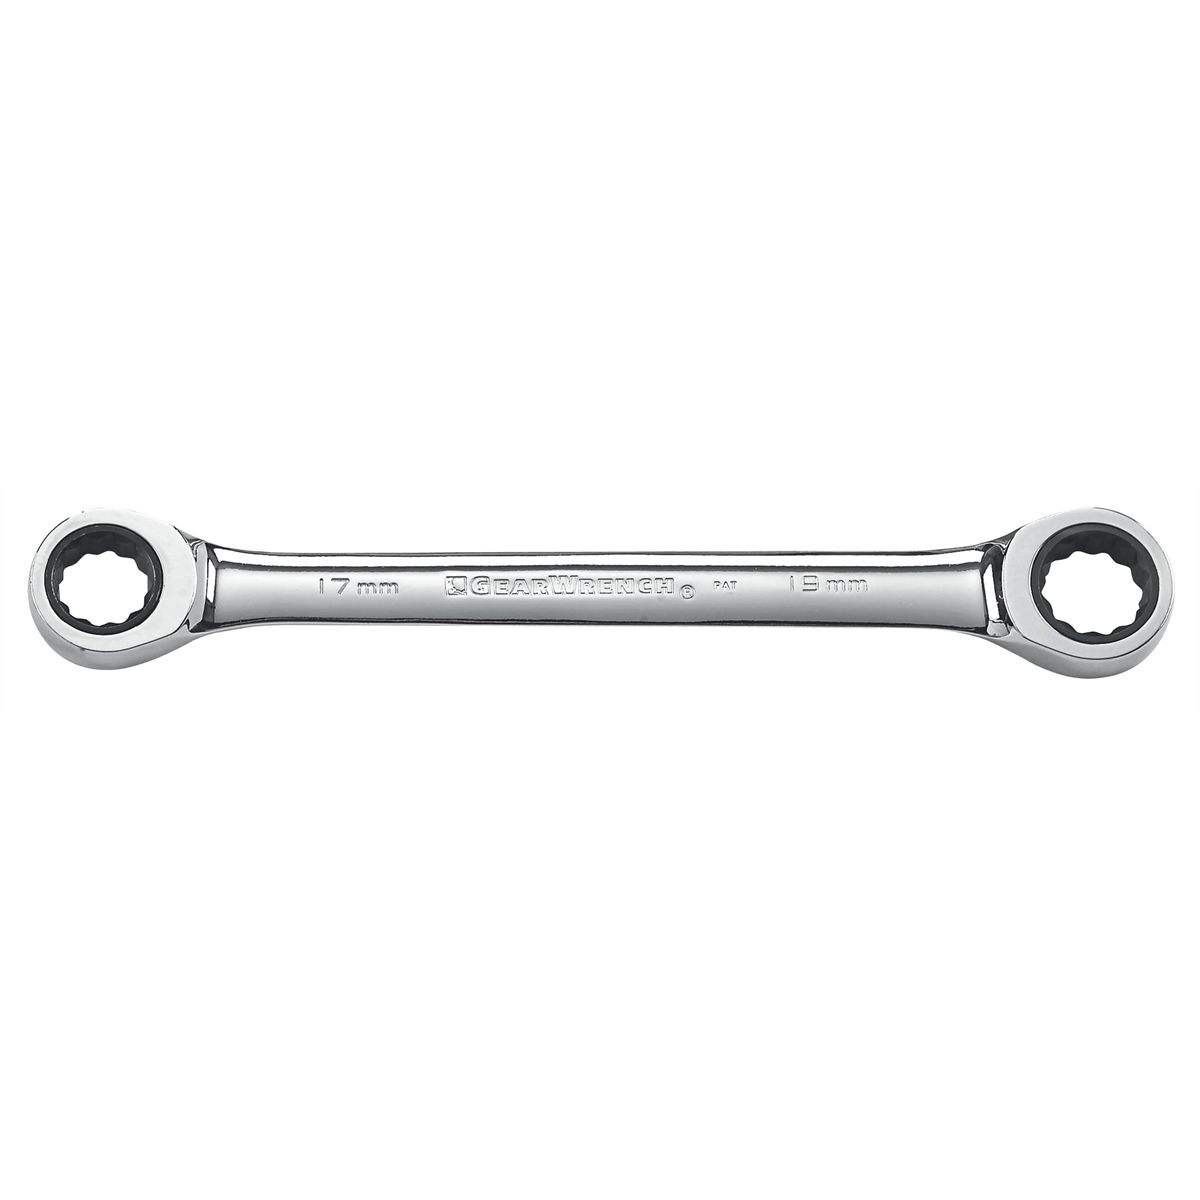 Connex COX538719 Wrench Angled Ratchet Box Silver/Black 17 x 19 mm 